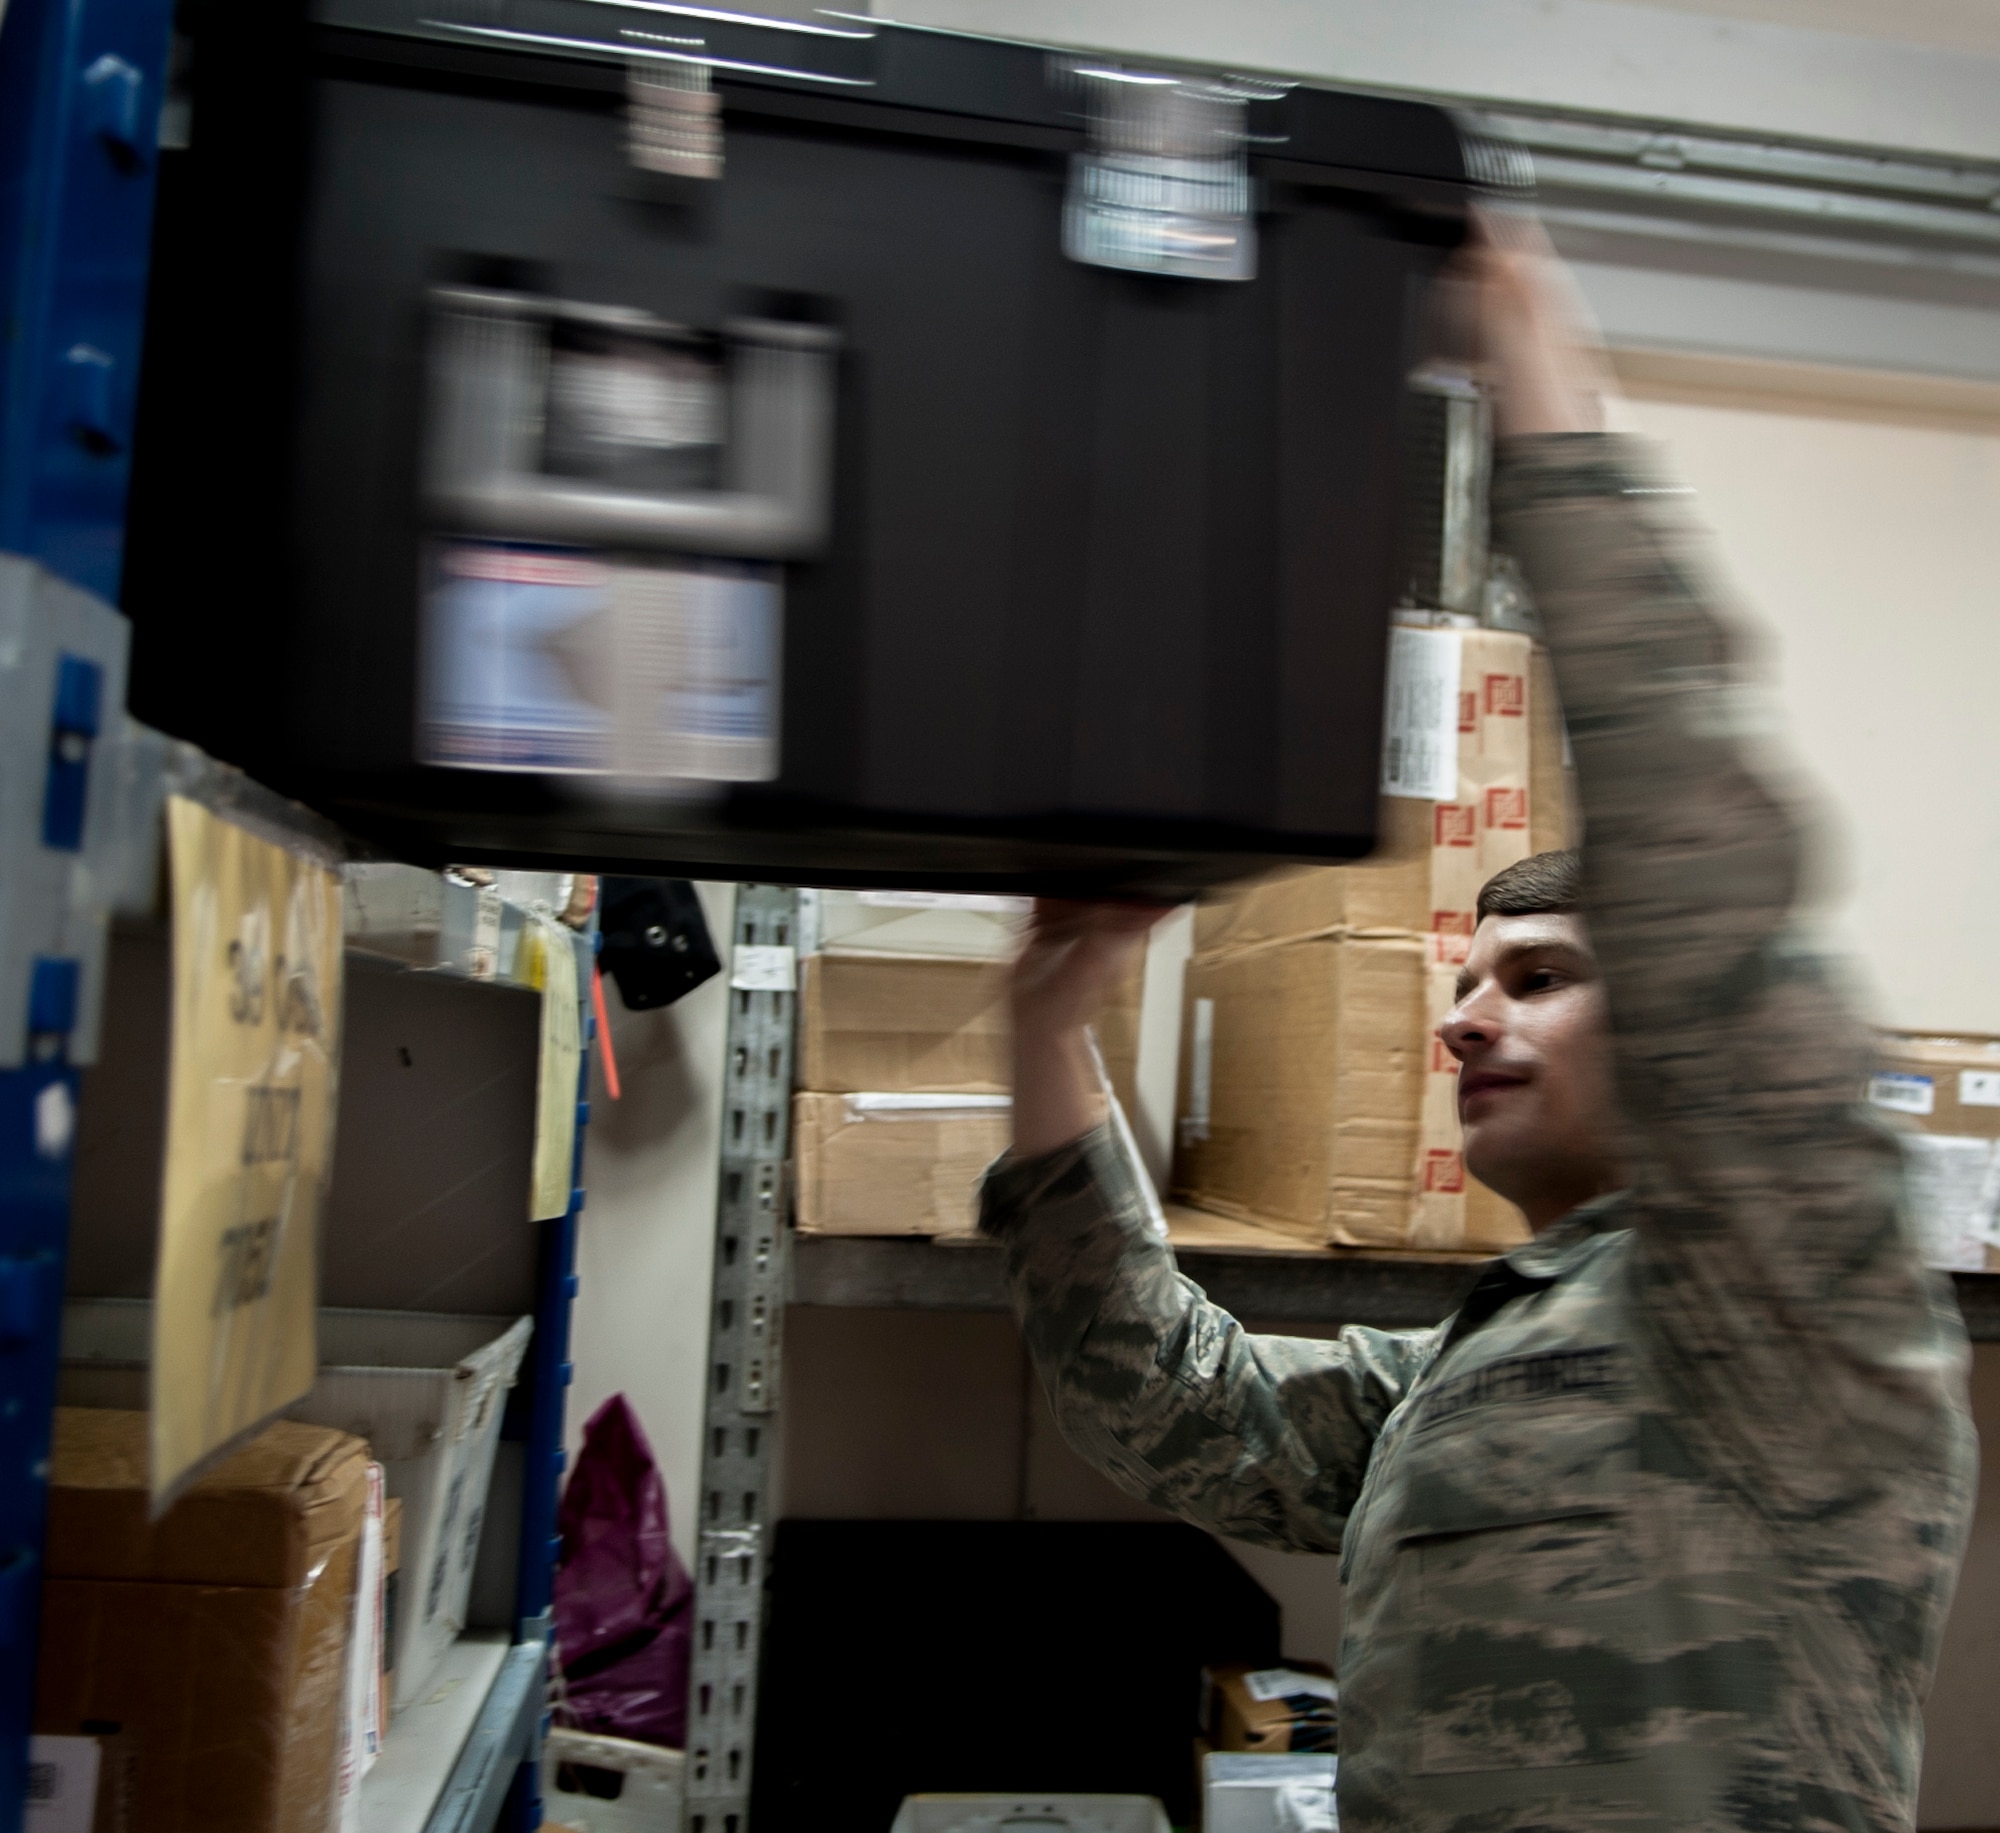 Airman 1st Class Clint Vetzel, 39th Communication Squadron mail clerk, places a package on a storage shelf Nov. 17, 2015, at Incirlik Air Base, Turkey. Vetzel is deployed to the 39th CS from RAF Alconbury, U.K .  The 39th CS has deployed members integrated into every section to assist with the increased operations tempo here. (U.S. Air Force photo by/Staff Sgt. Jack Sanders/Released)